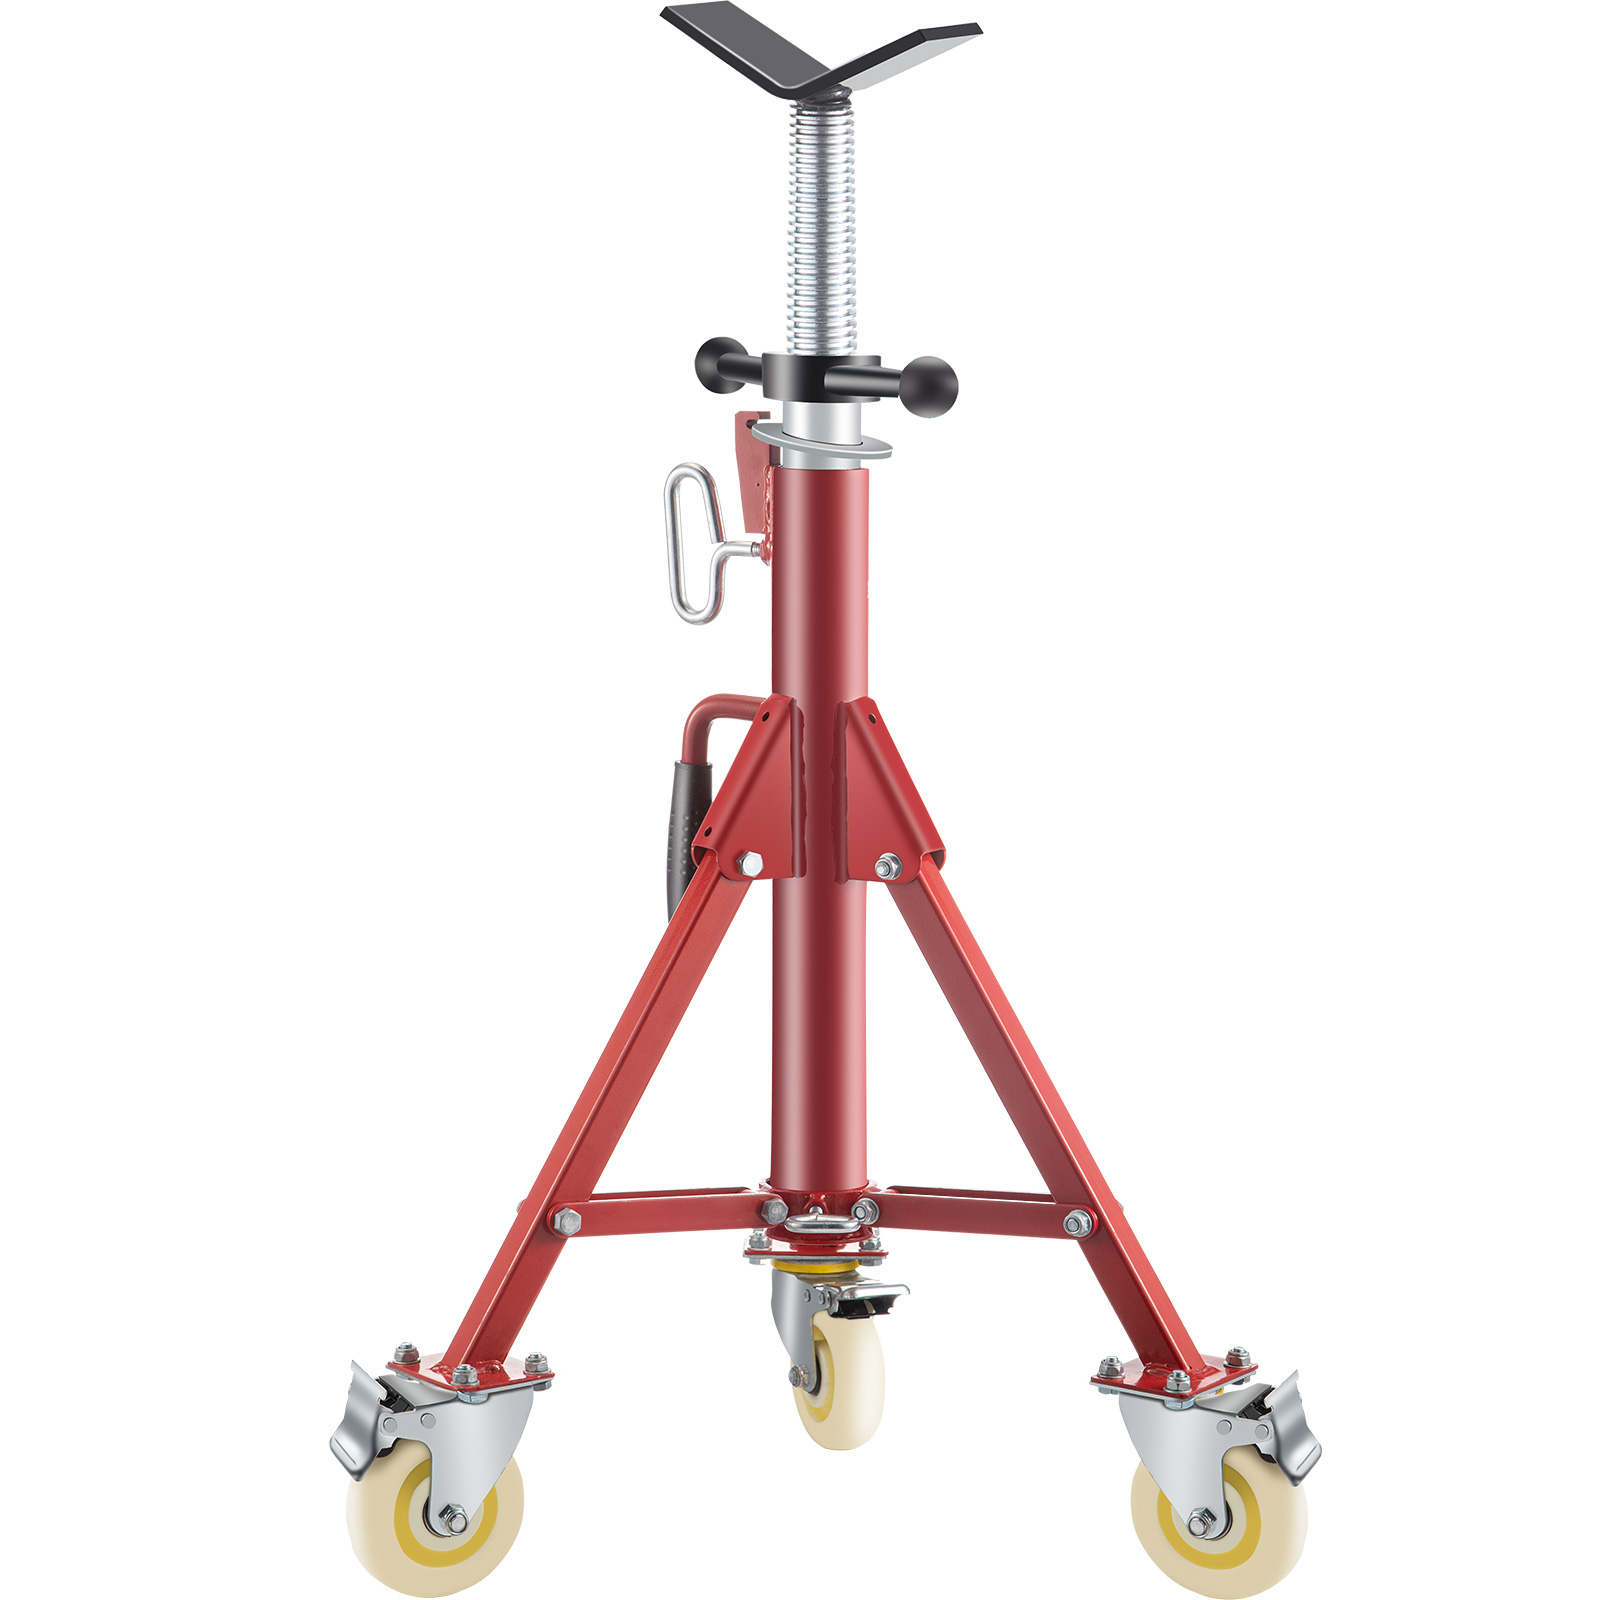 jack stands, welding supplies, pipe fitter tools